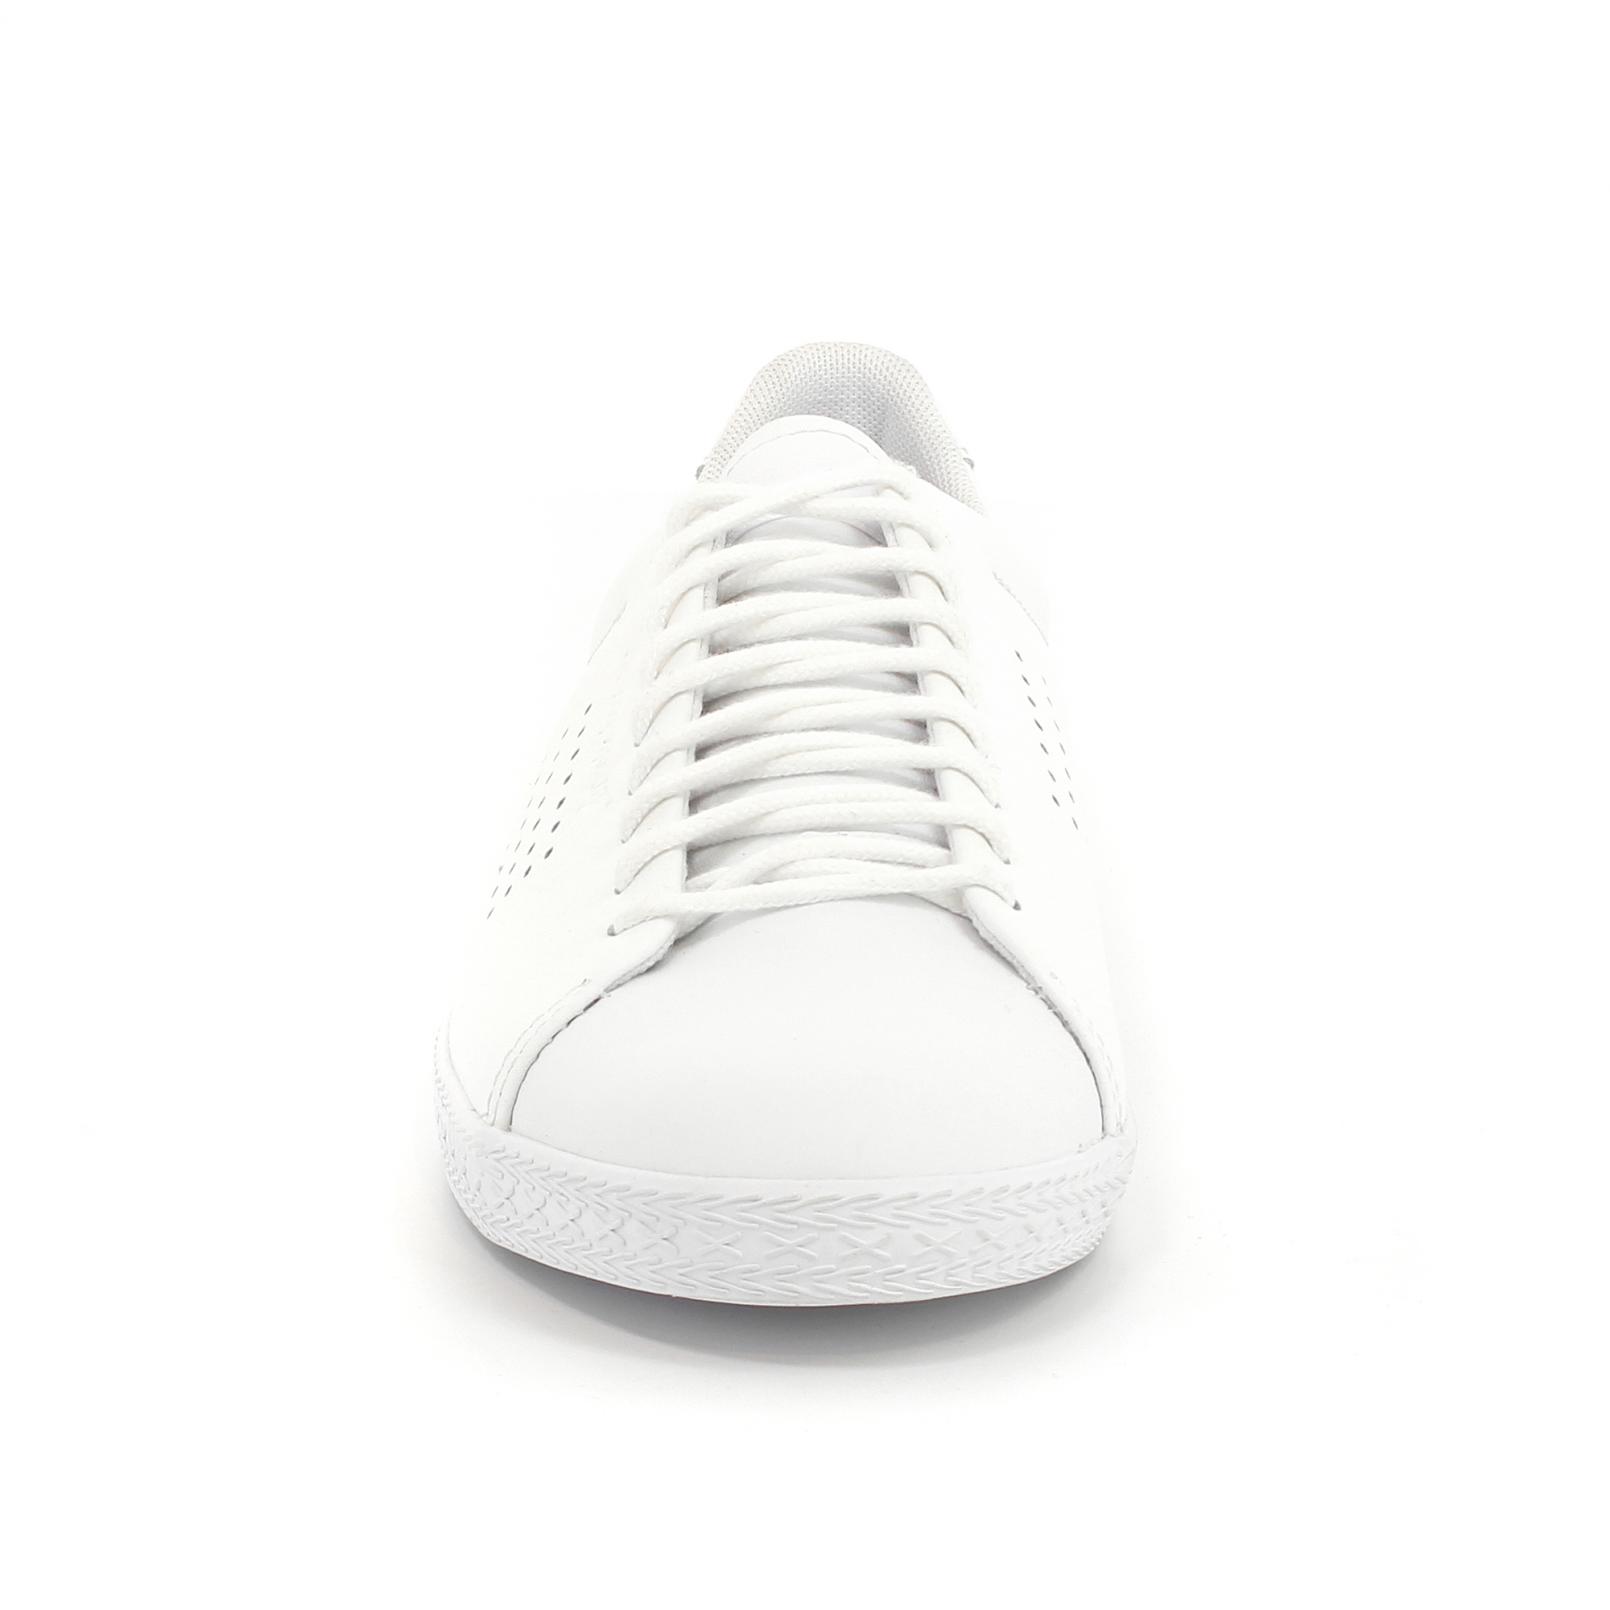 Shoes – Le Coq Sportif Charline Leather White